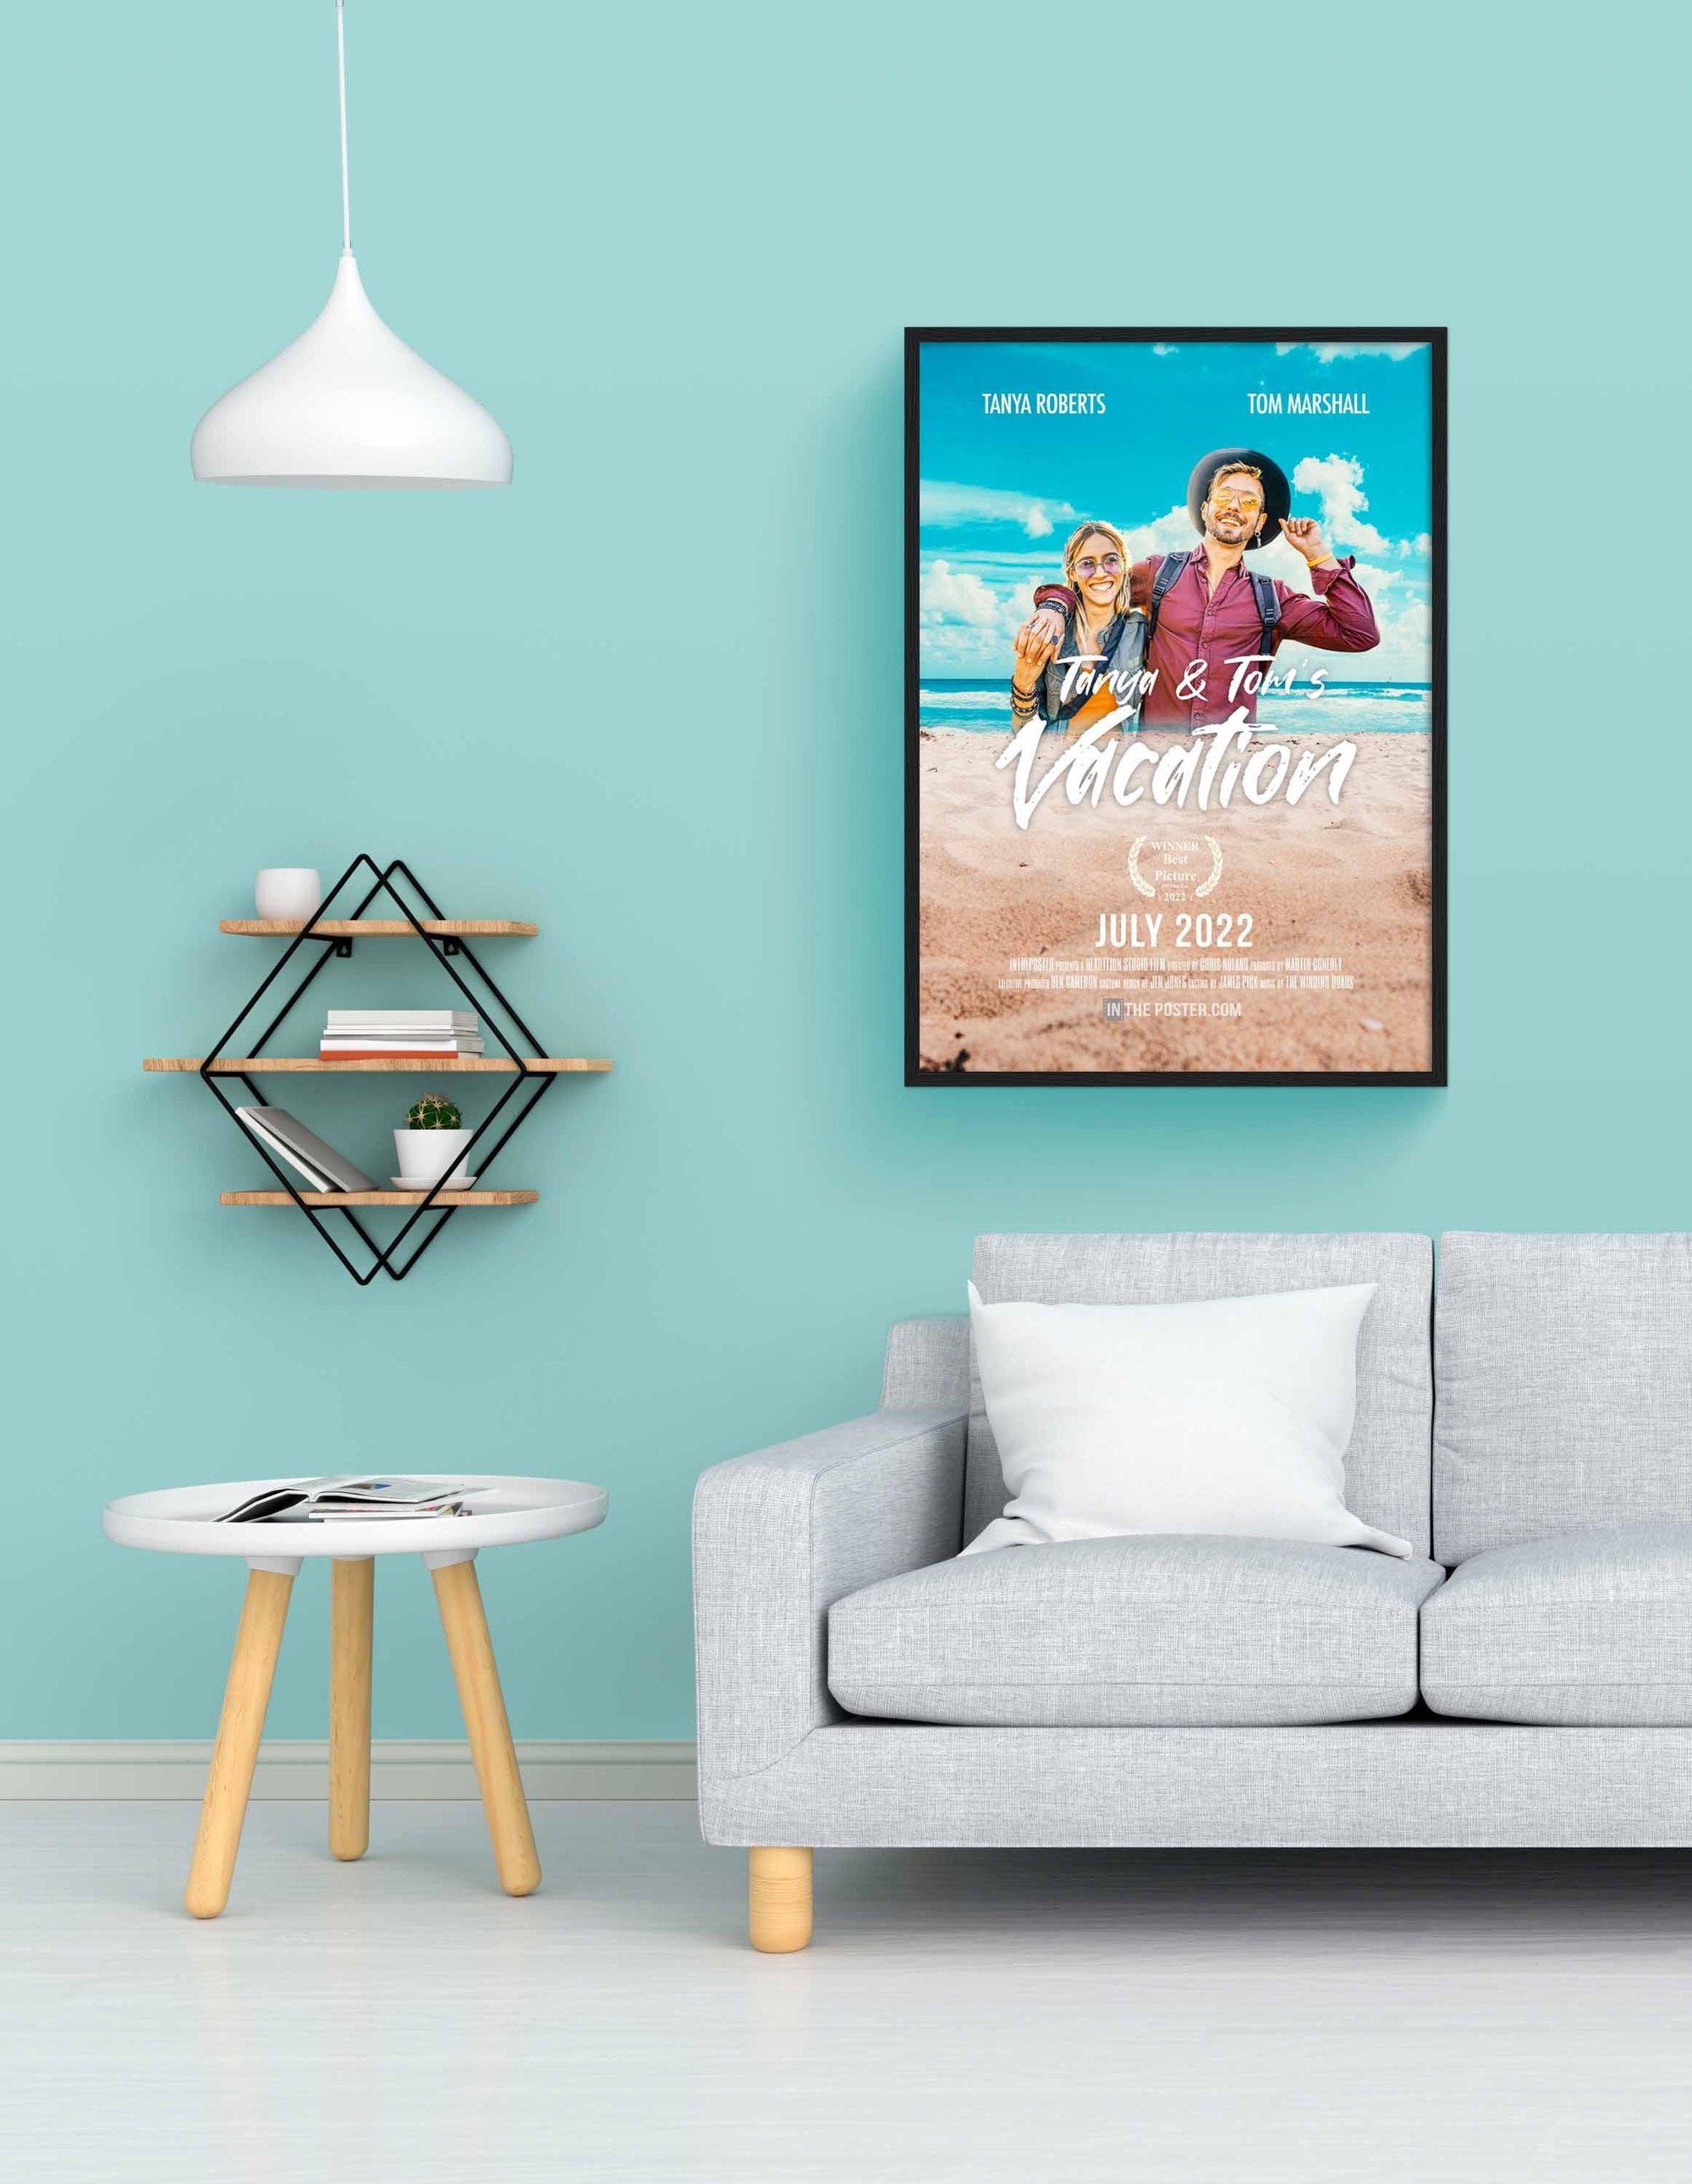 The Vacation Custom Movie Poster with travel buddies in a black picture frame on a blue wall above a grey sofa